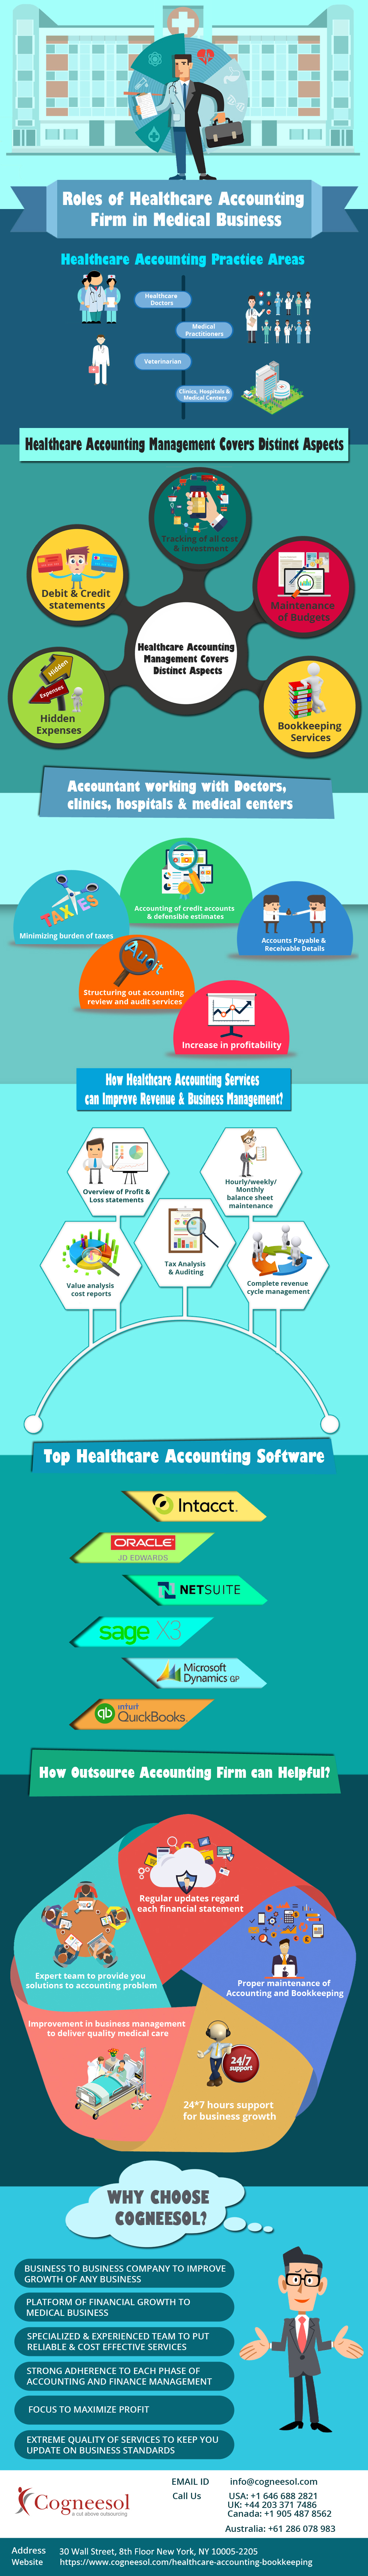 Healthcare Accounting